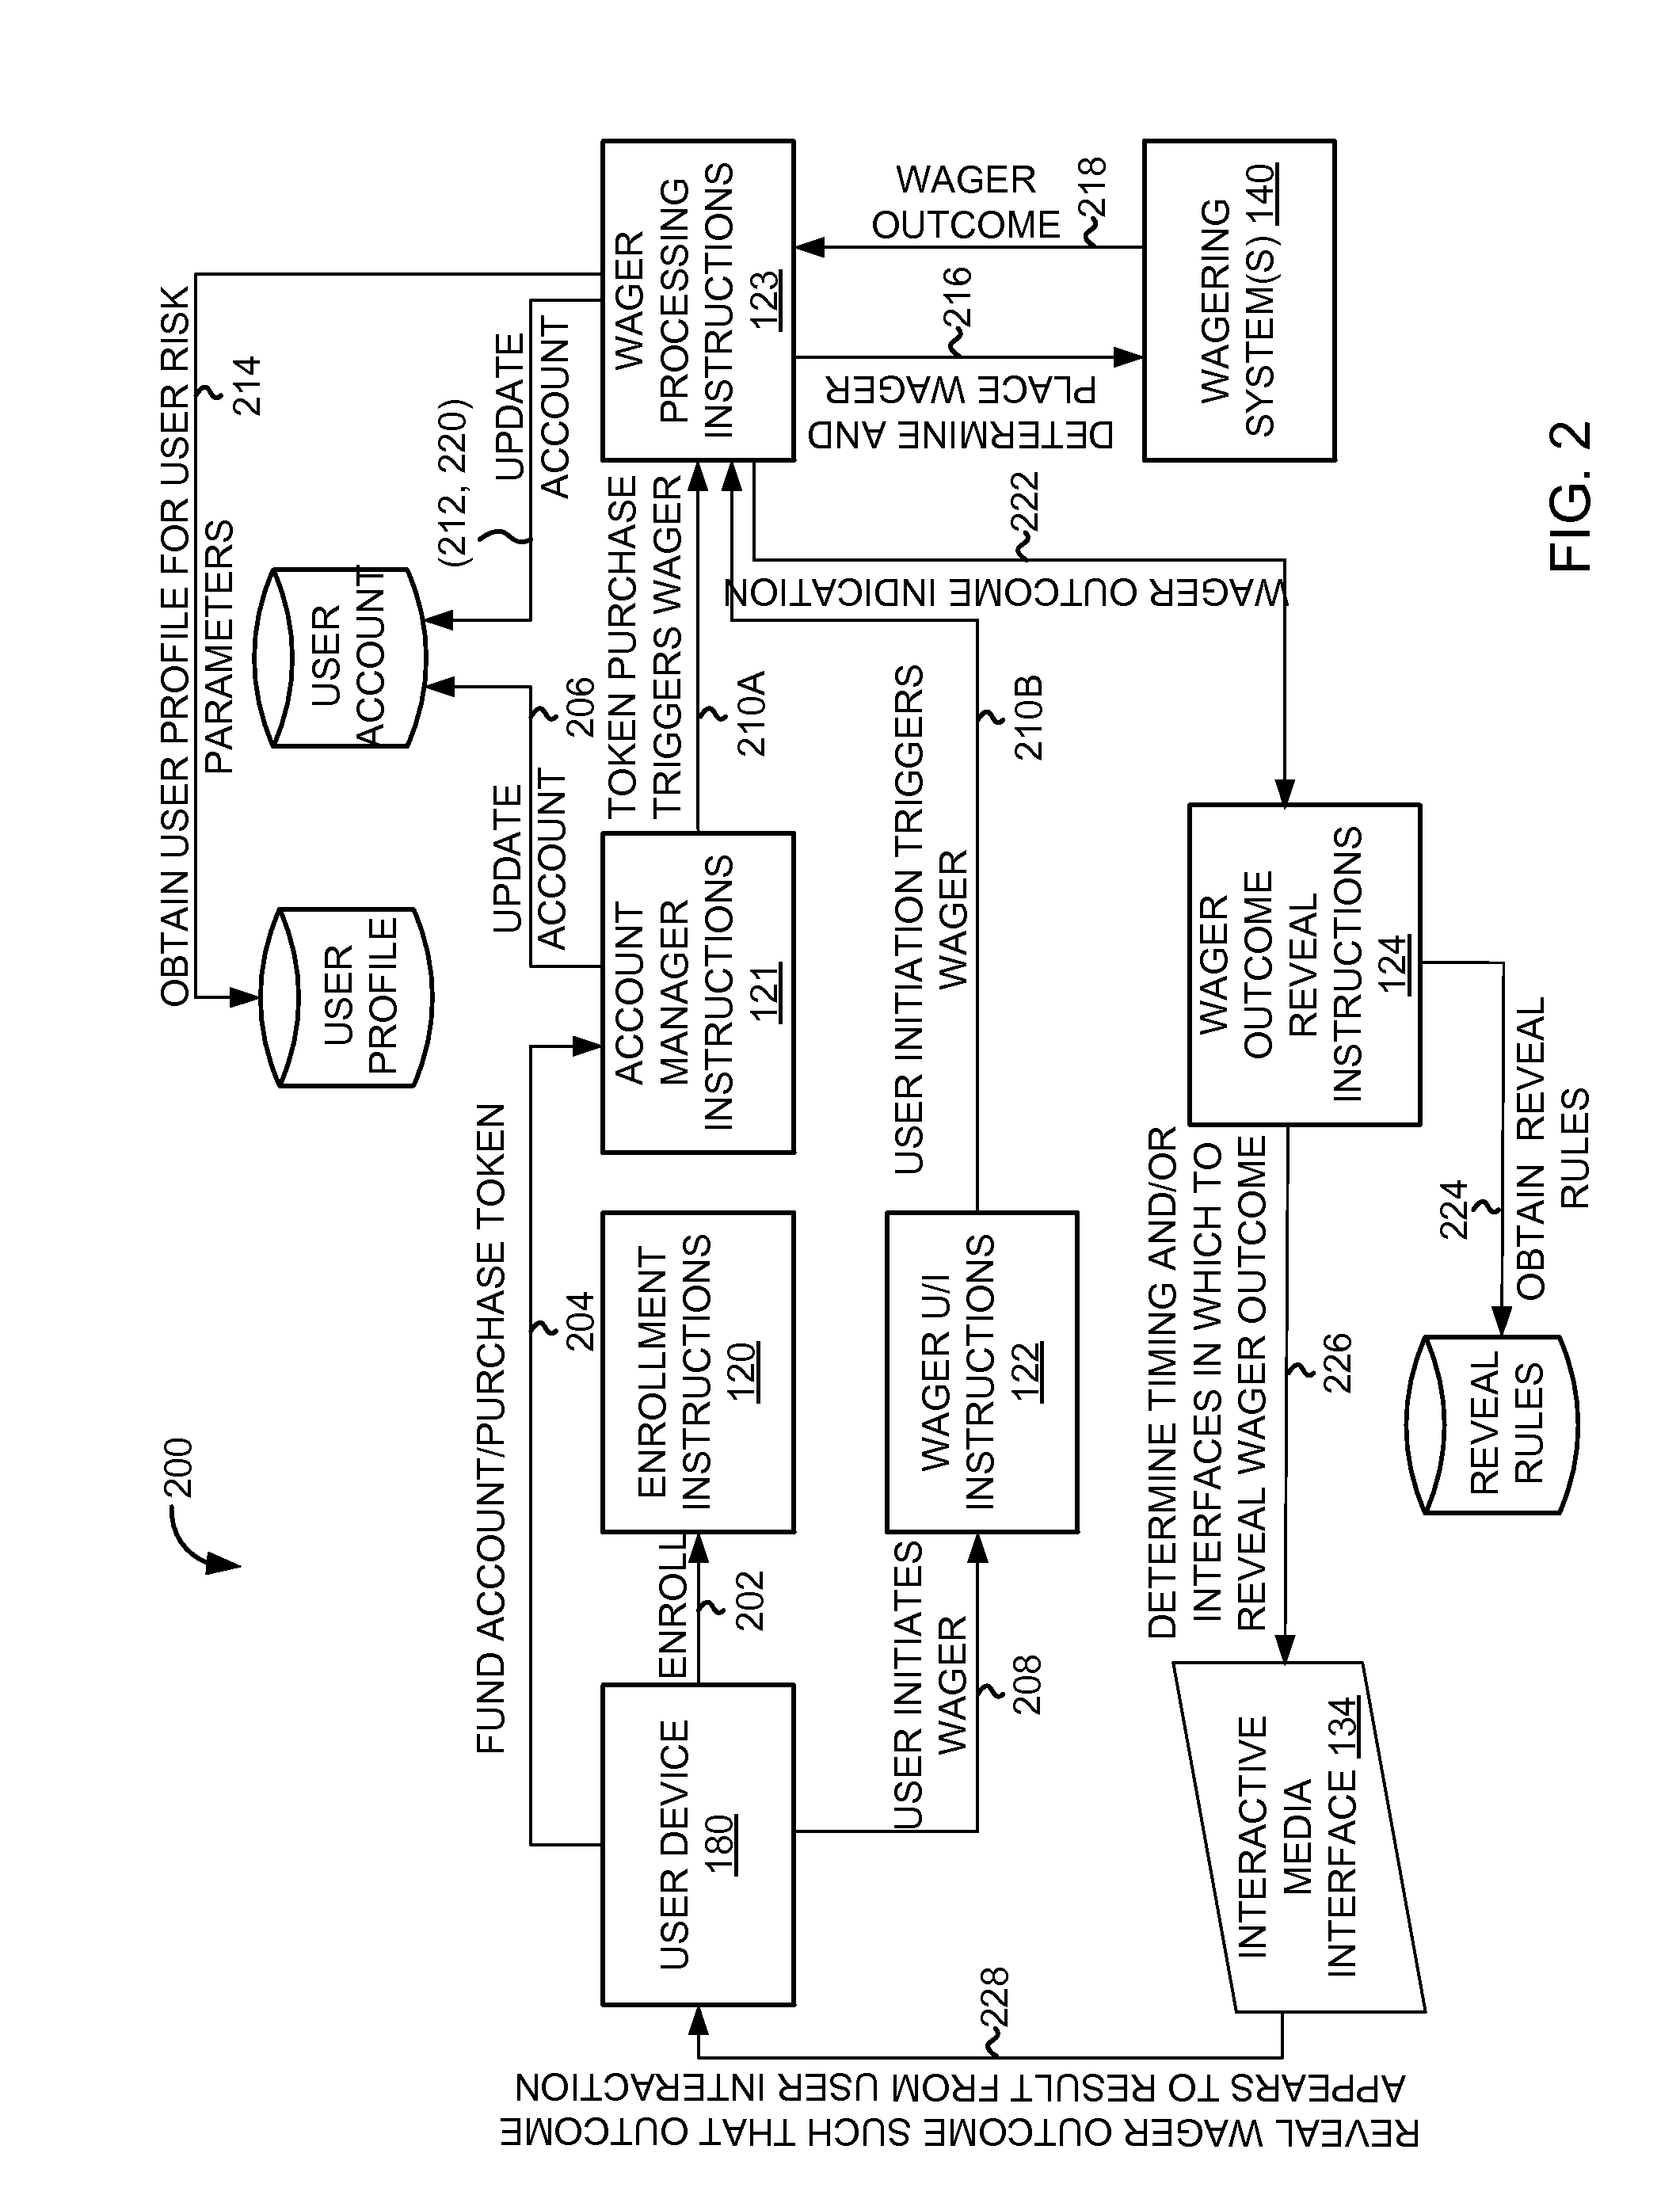 System and Method of Providing Wagering Opportunities Based on External Triggers